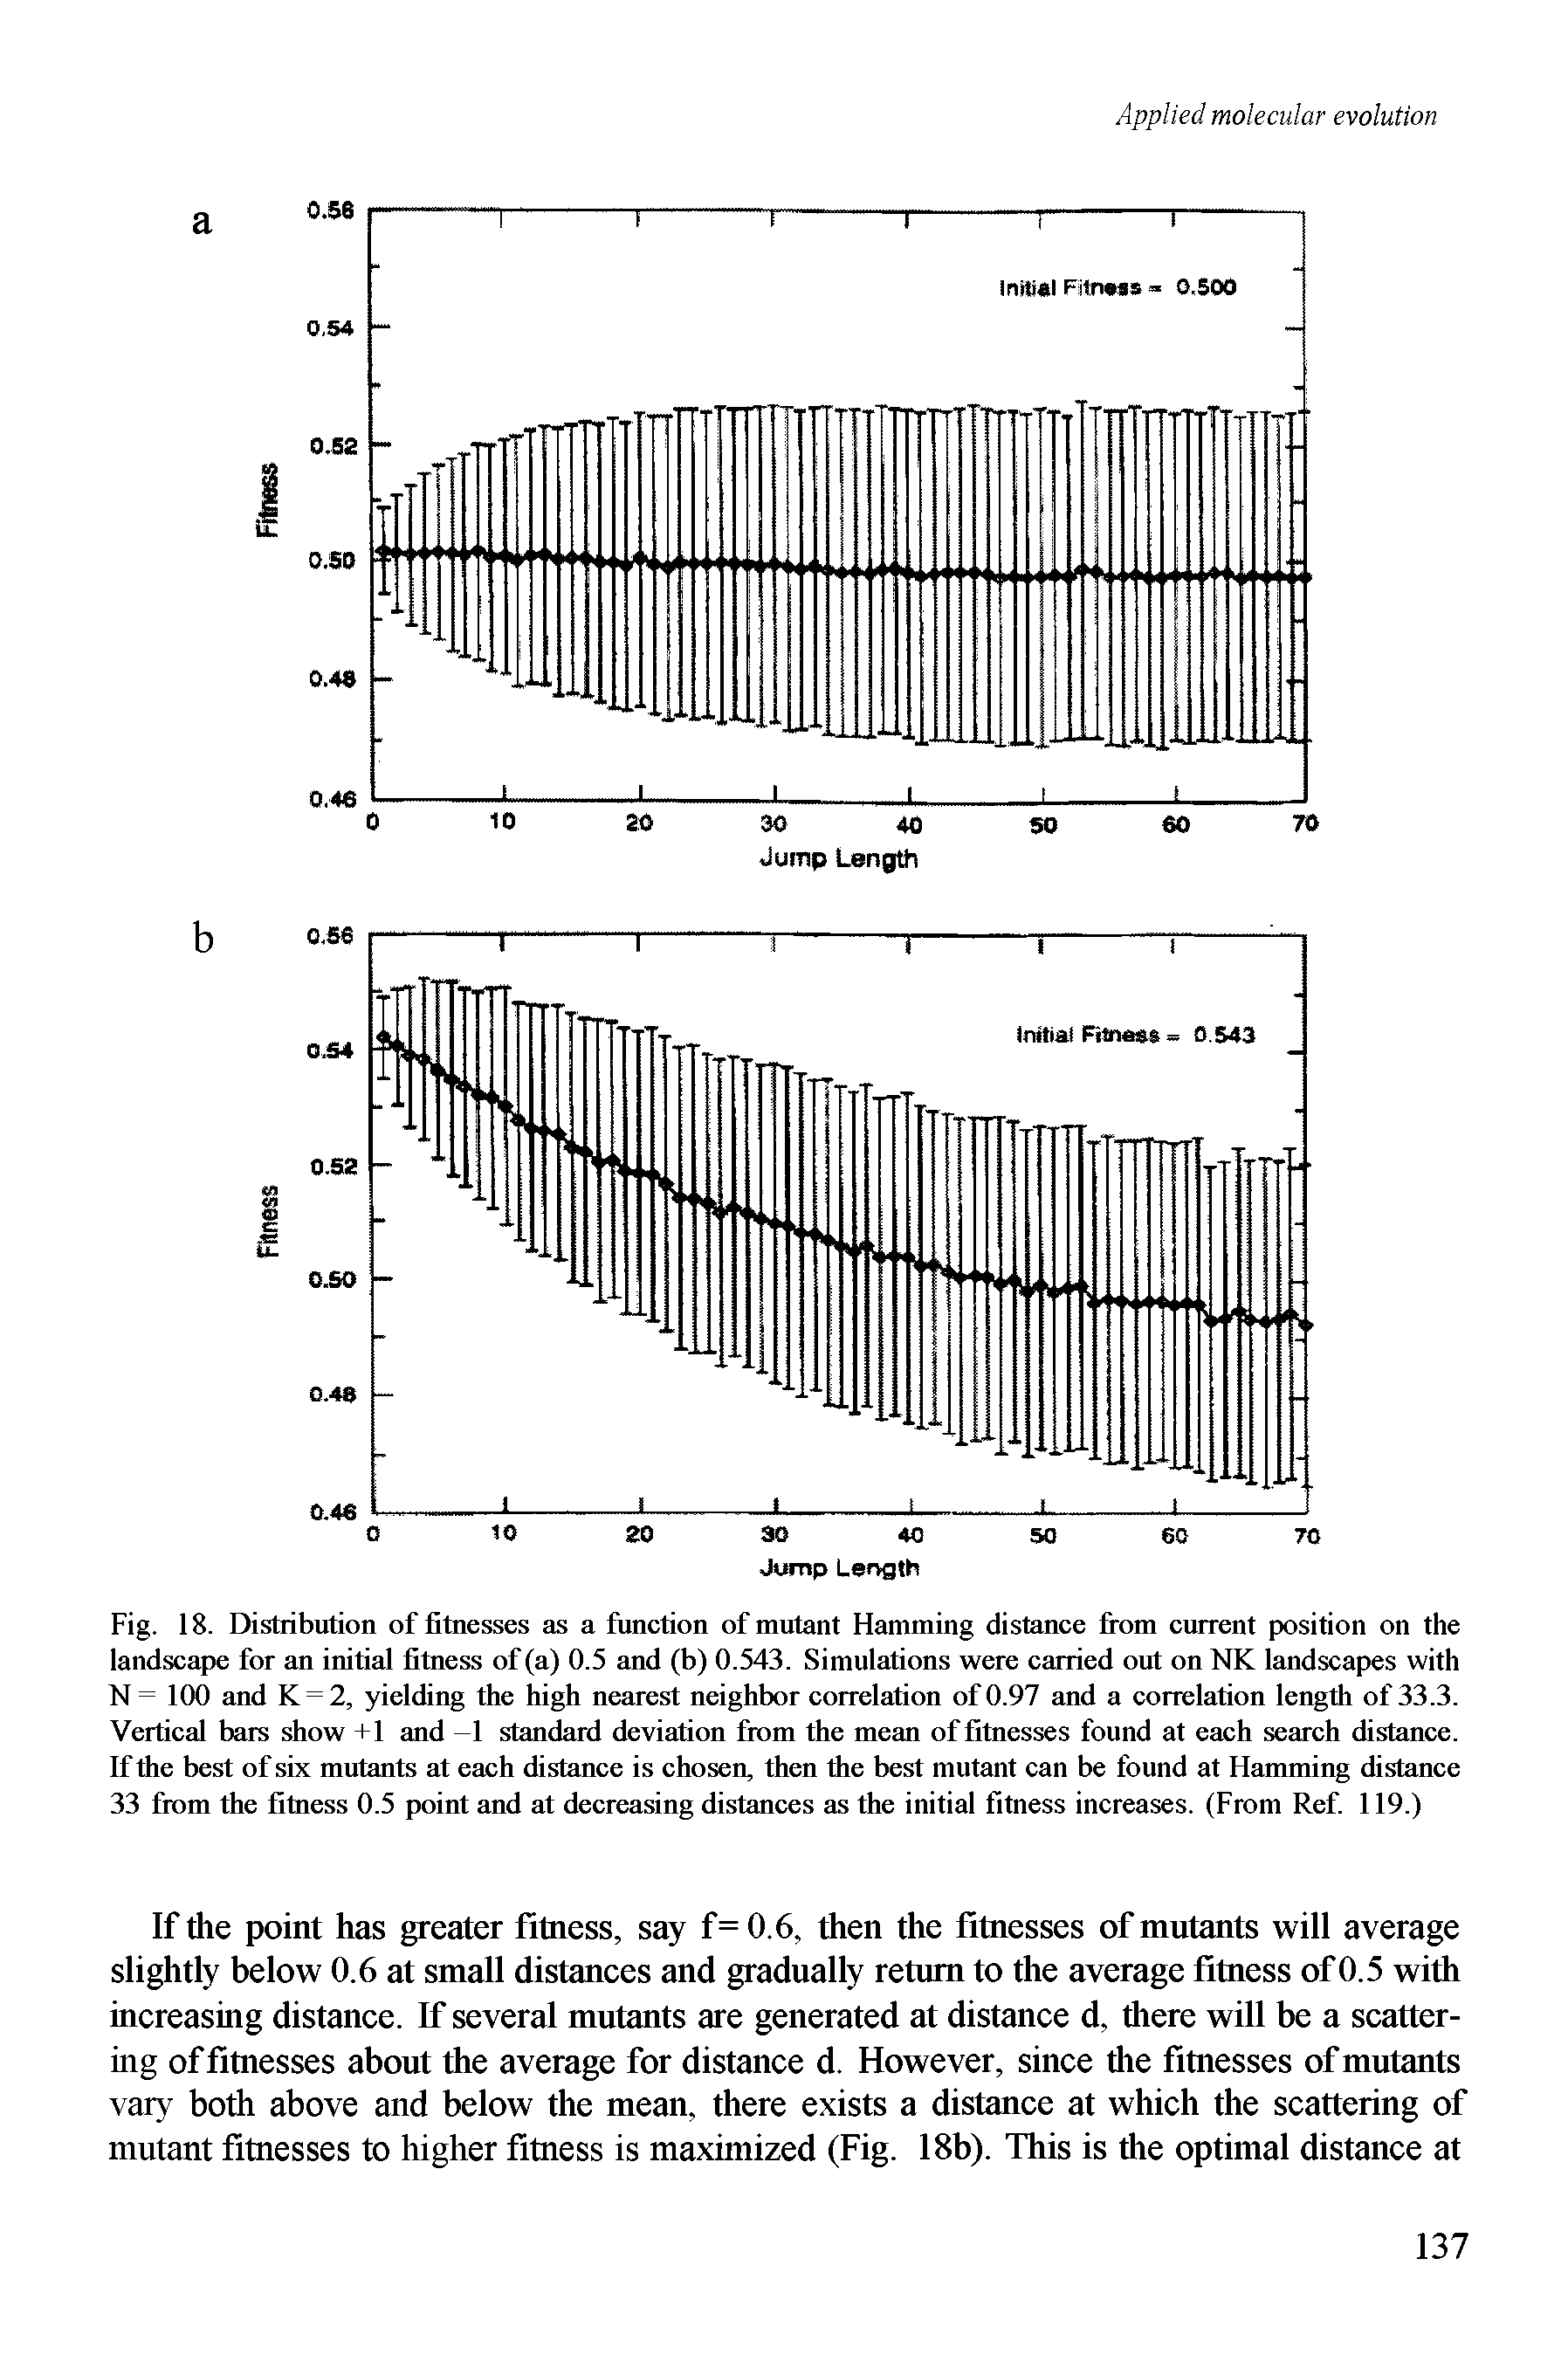 Fig. 18. Distribution of fitnesses as a function of mutant Hamming distance from current position on the landscape for an initial fitness of (a) 0.5 and (b) 0.543. Simulations were carried out on NK landscapes with N= 100 and K = 2, yielding the high nearest neighbor correlation of 0.97 and a correlation length of 33.3. Vertical bars show +1 and -1 standard deviation from the mean of fitnesses found at each search distance. If the best of six mutants at each distance is chosen, then the best mutant can be found at Hamming distance 33 from the fitness 0.5 point and at decreasing distances as the initial fitness increases. (From Ref. 119.)...